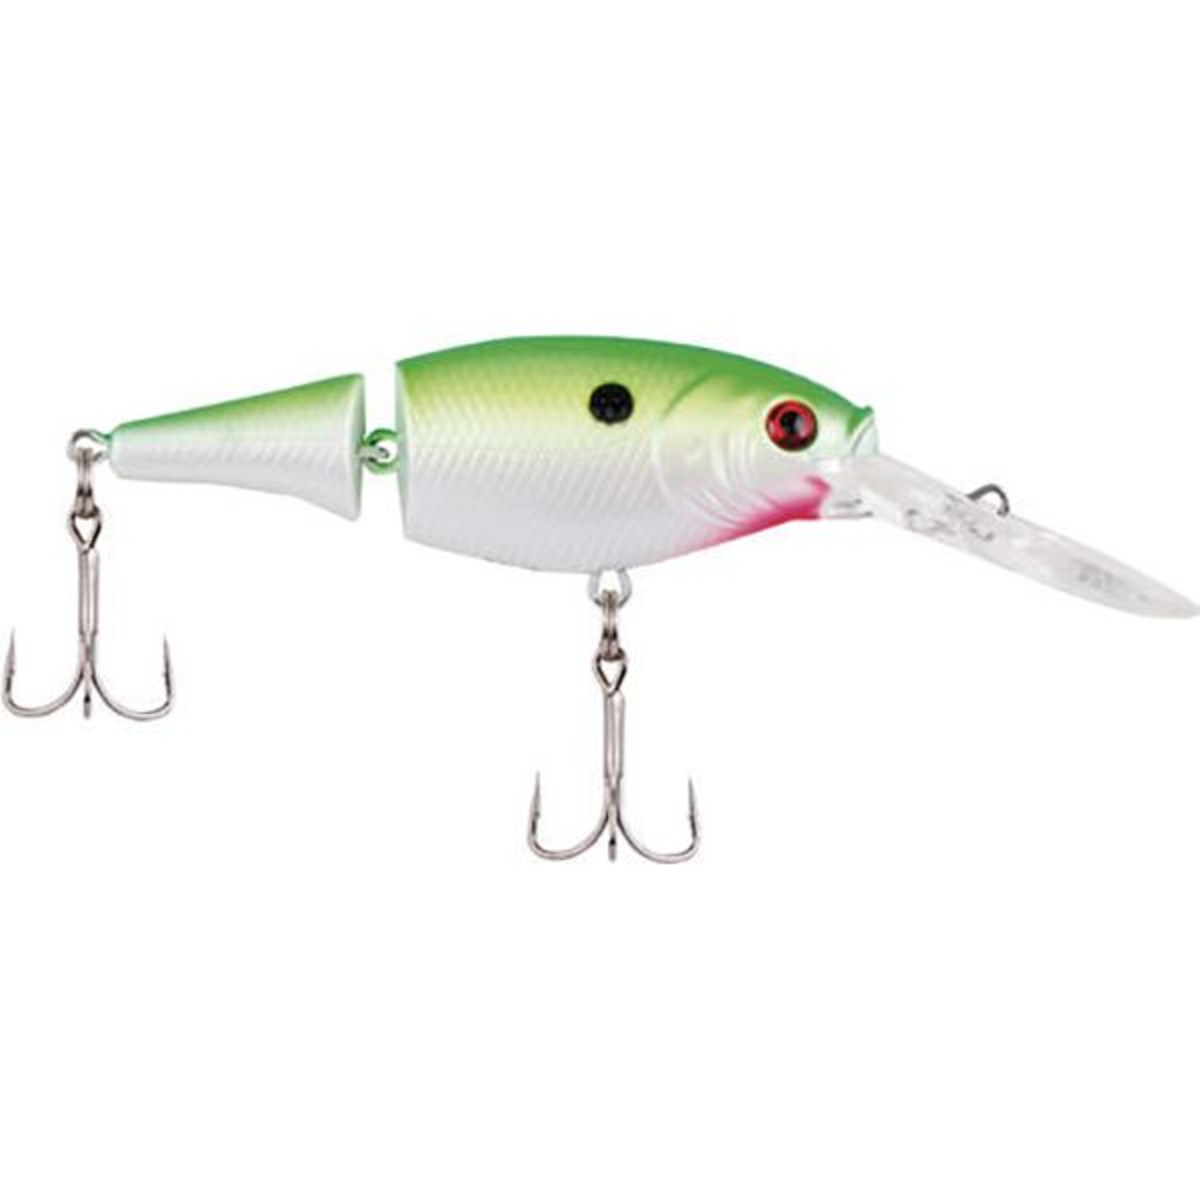 Berkley Flicker Shad Jointed - 5 cm - 6 g - Chartreuse Pearl